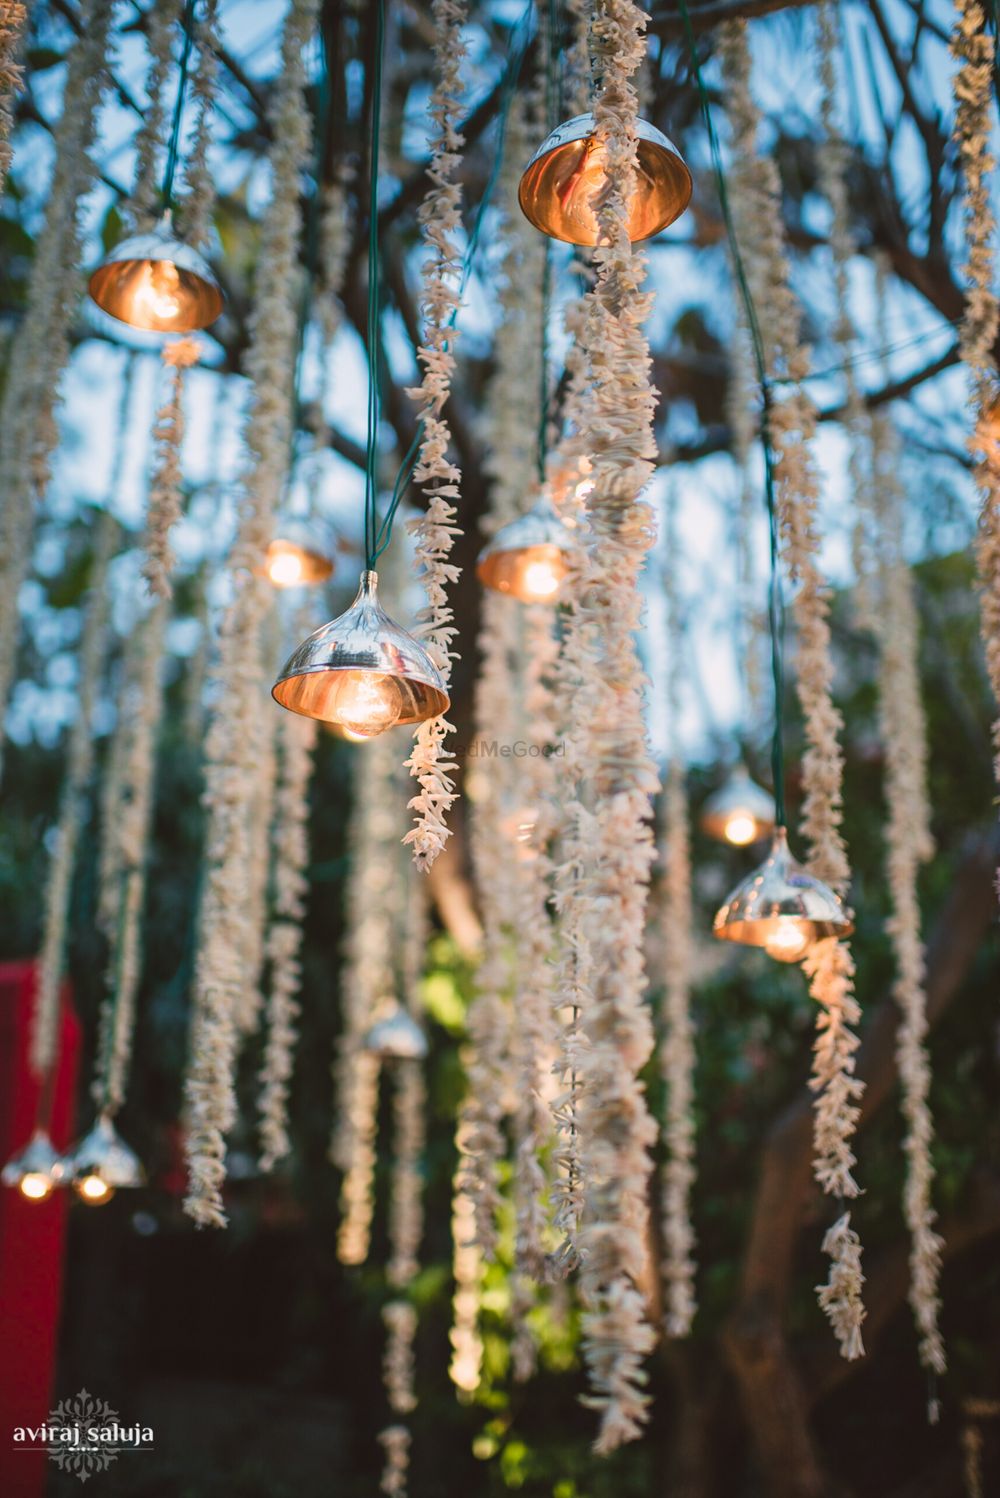 Photo of Floral Hanging Decor with Bulbs